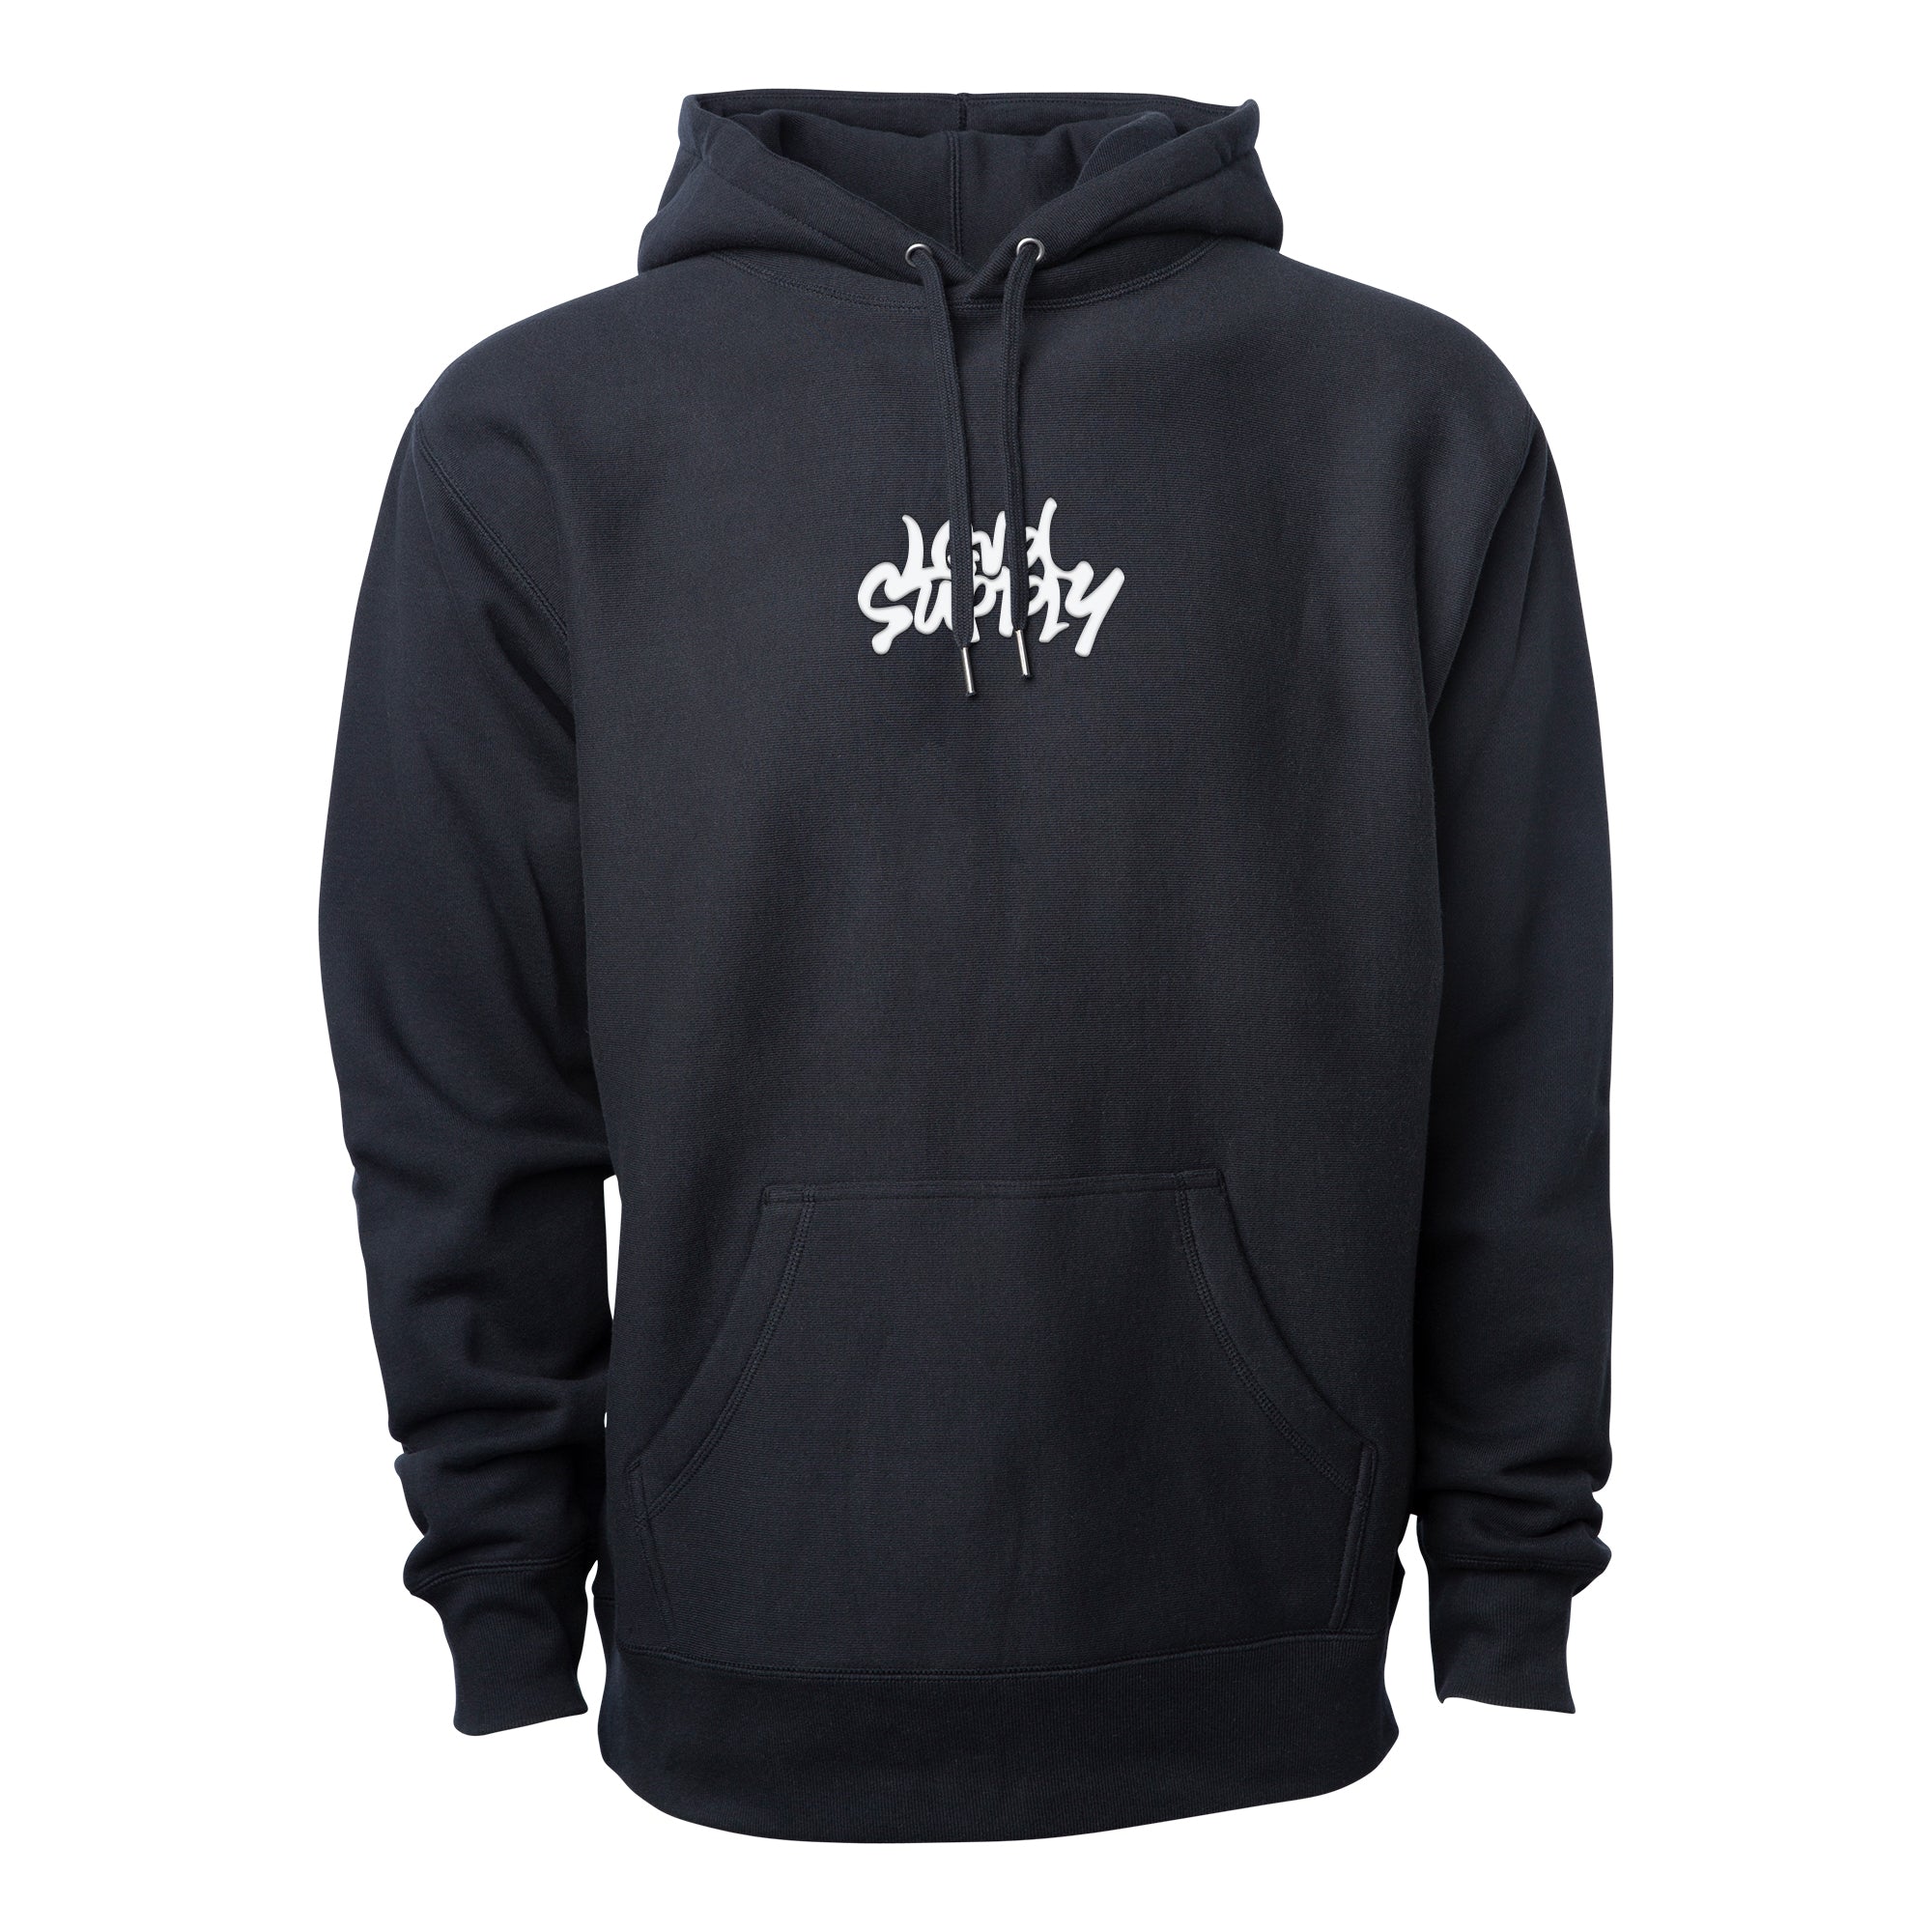 Super Heavyweight Embroidered Hoodie